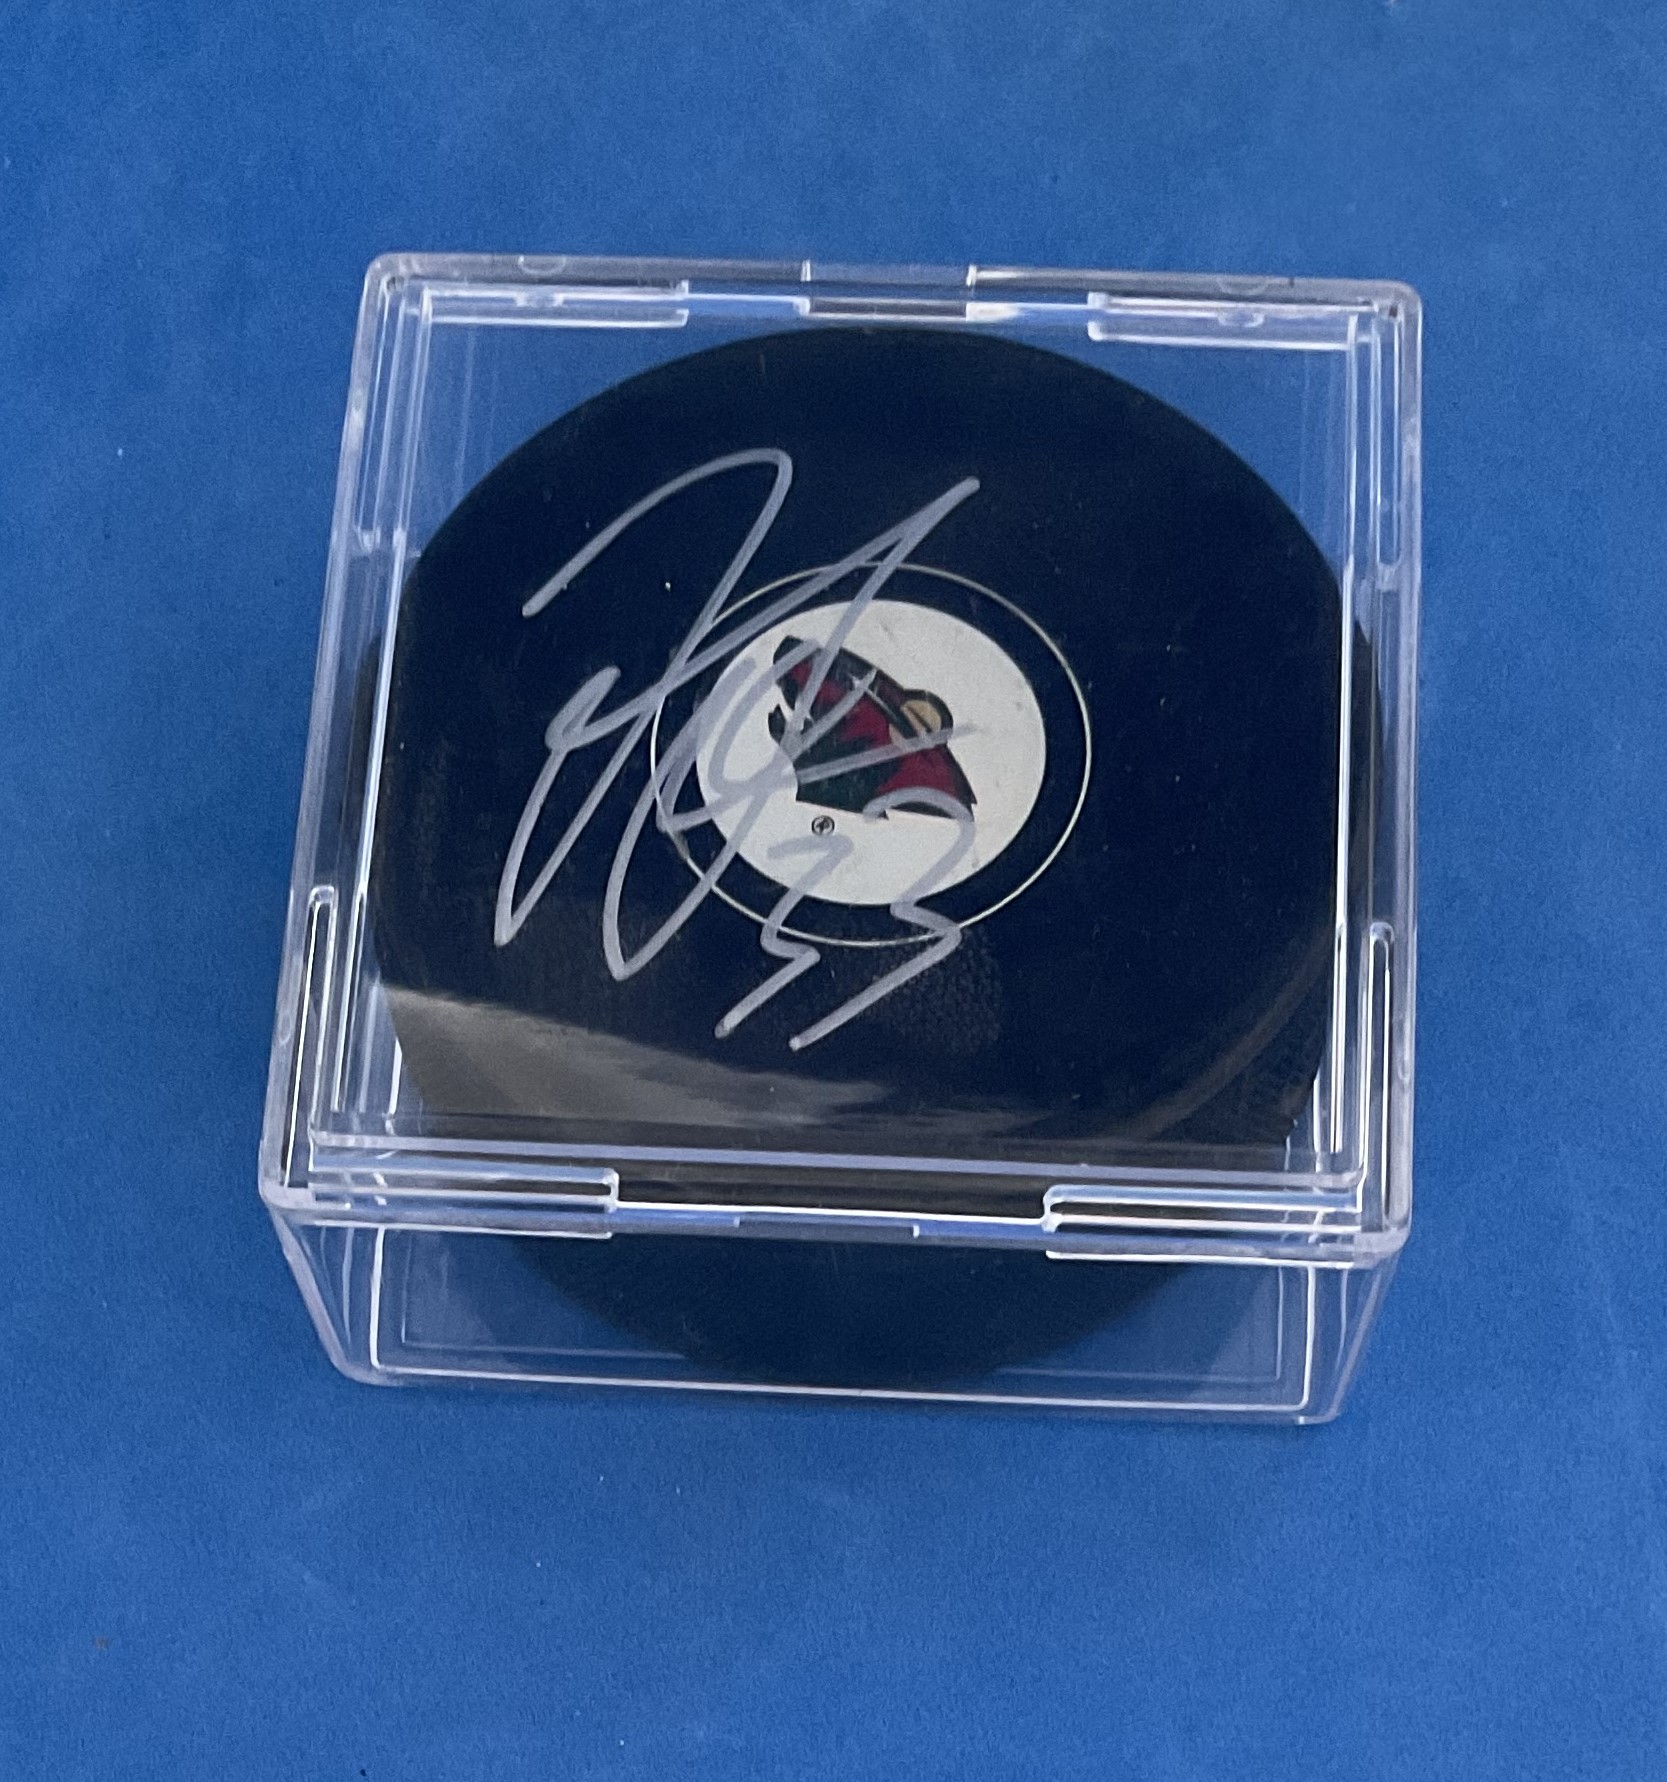 American Ice Hockey Defender Jordan Leopold Signed Official NHL Puck. Signed in silver ink. Housed - Image 2 of 2